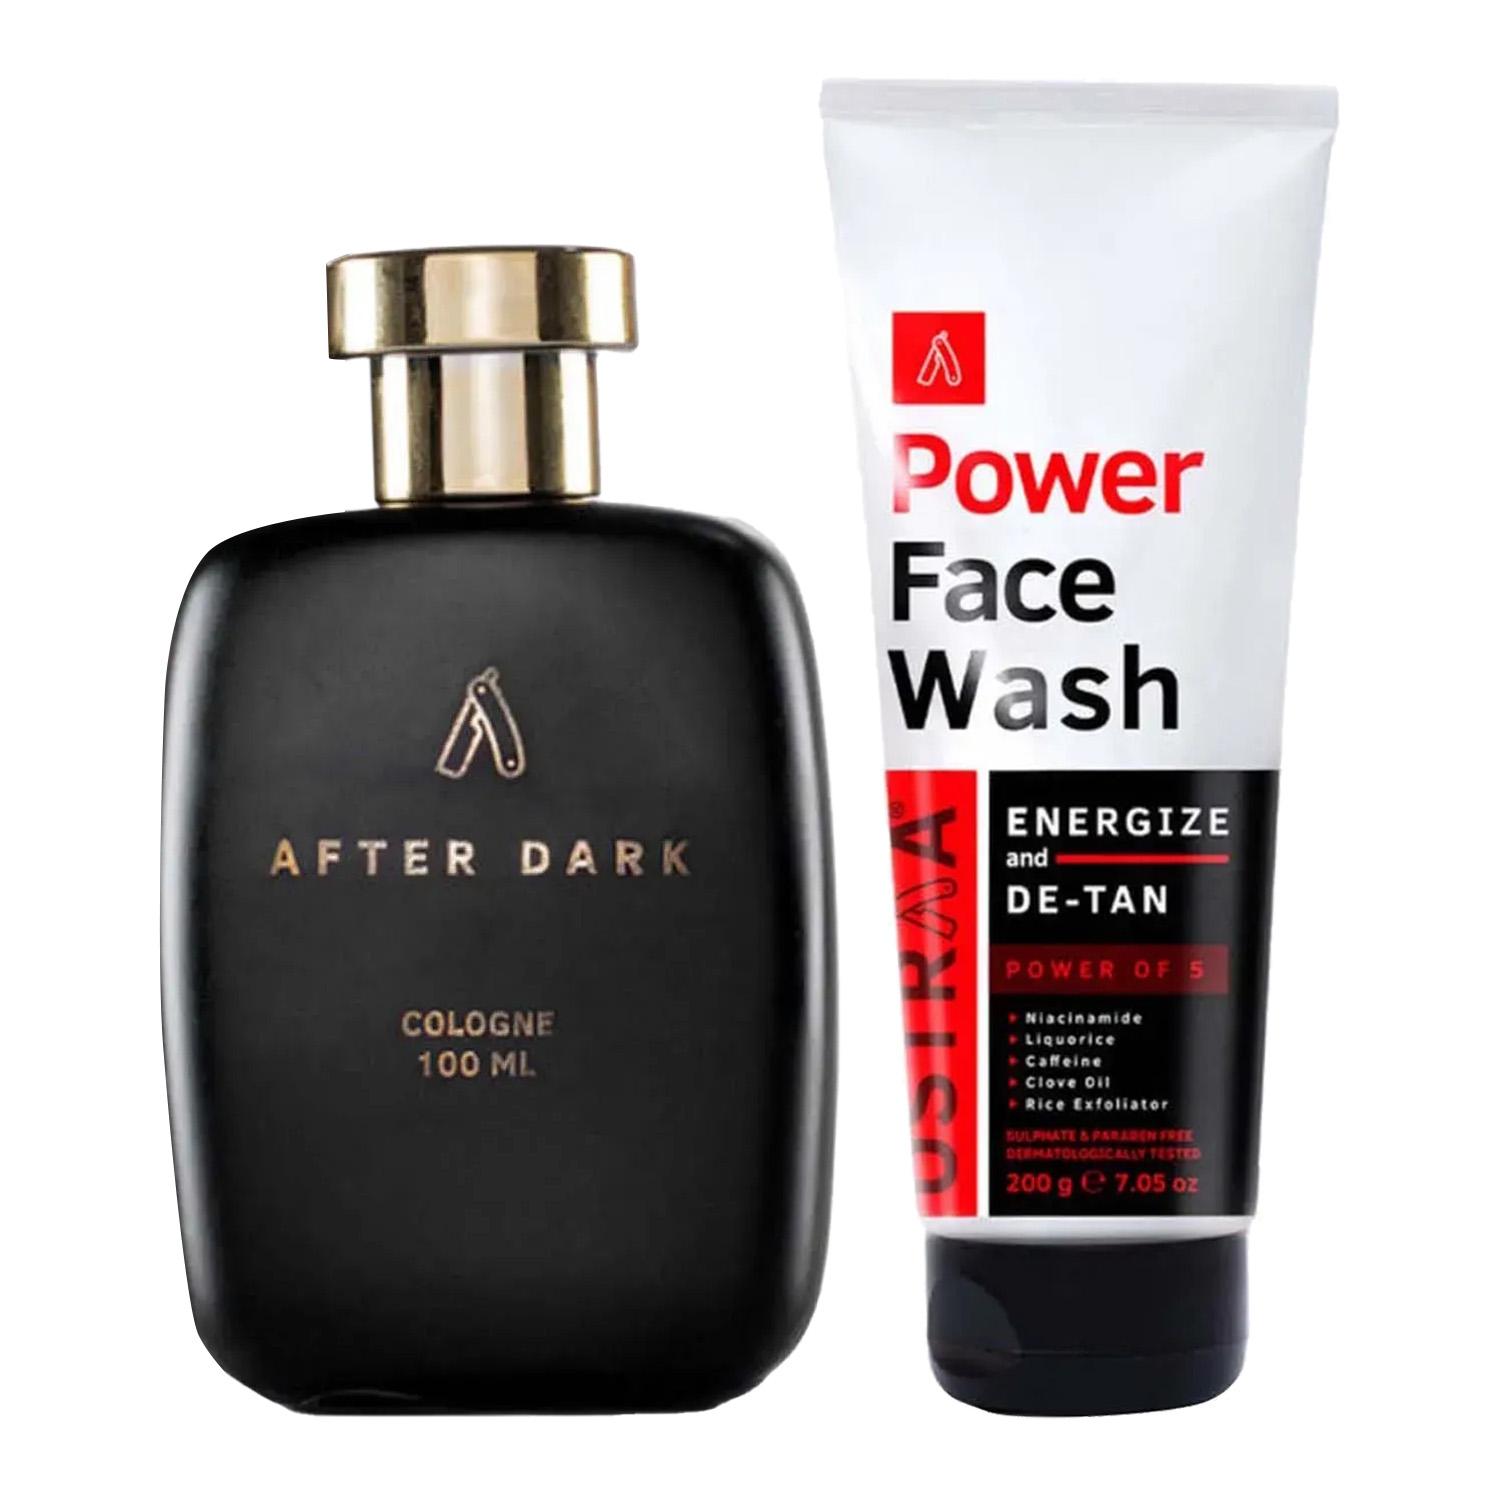 Ustraa | Ustraa Energize And De-Tan Power Face Wash (200 g) & Cologne For Men After Dark (100 ml) Combo